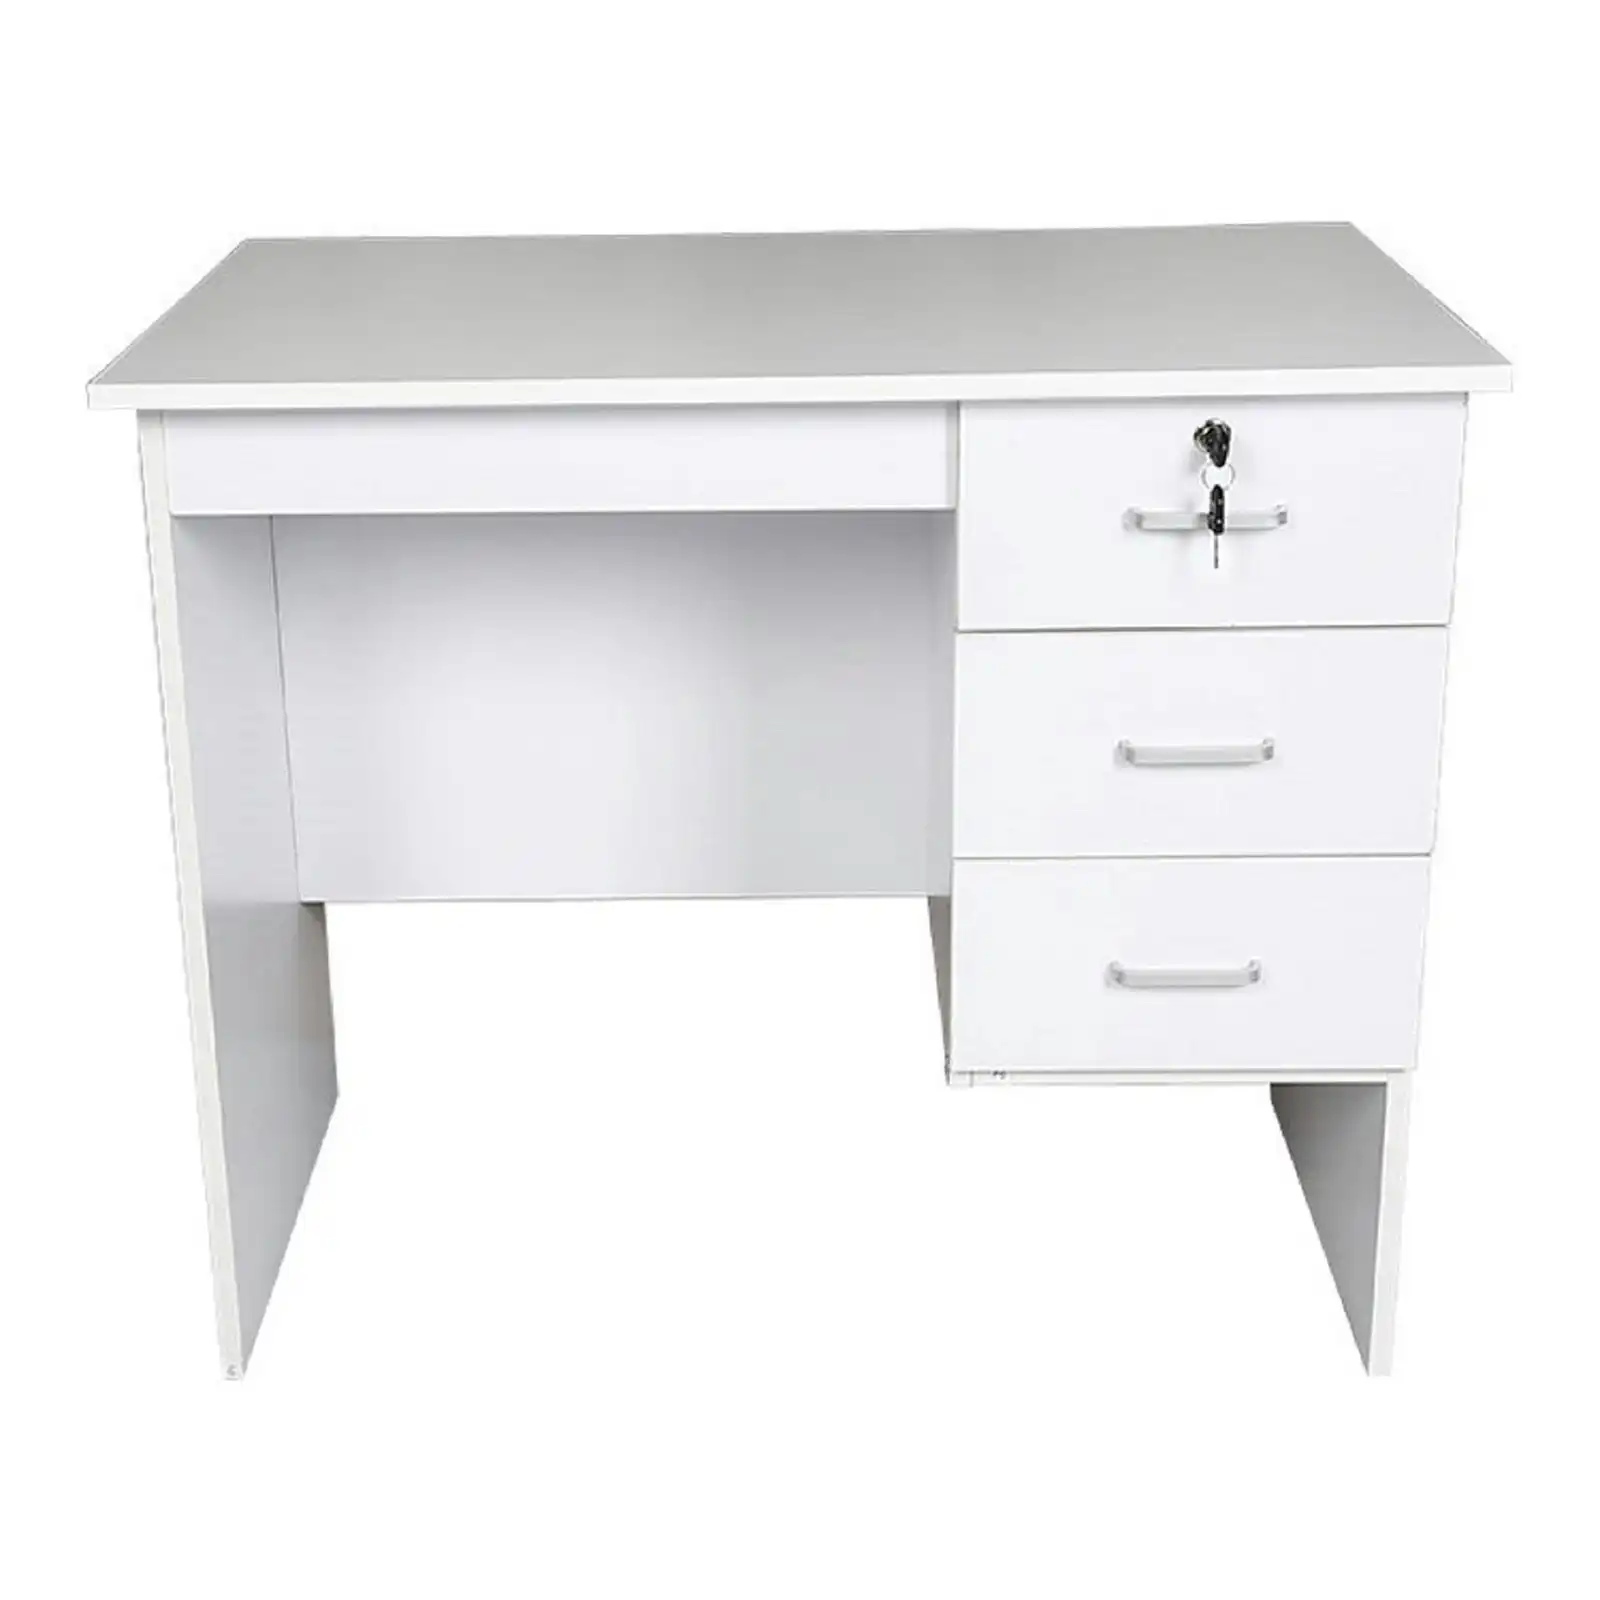 HEQS Redfern 0.9M Study Desk with 3 Drawers White